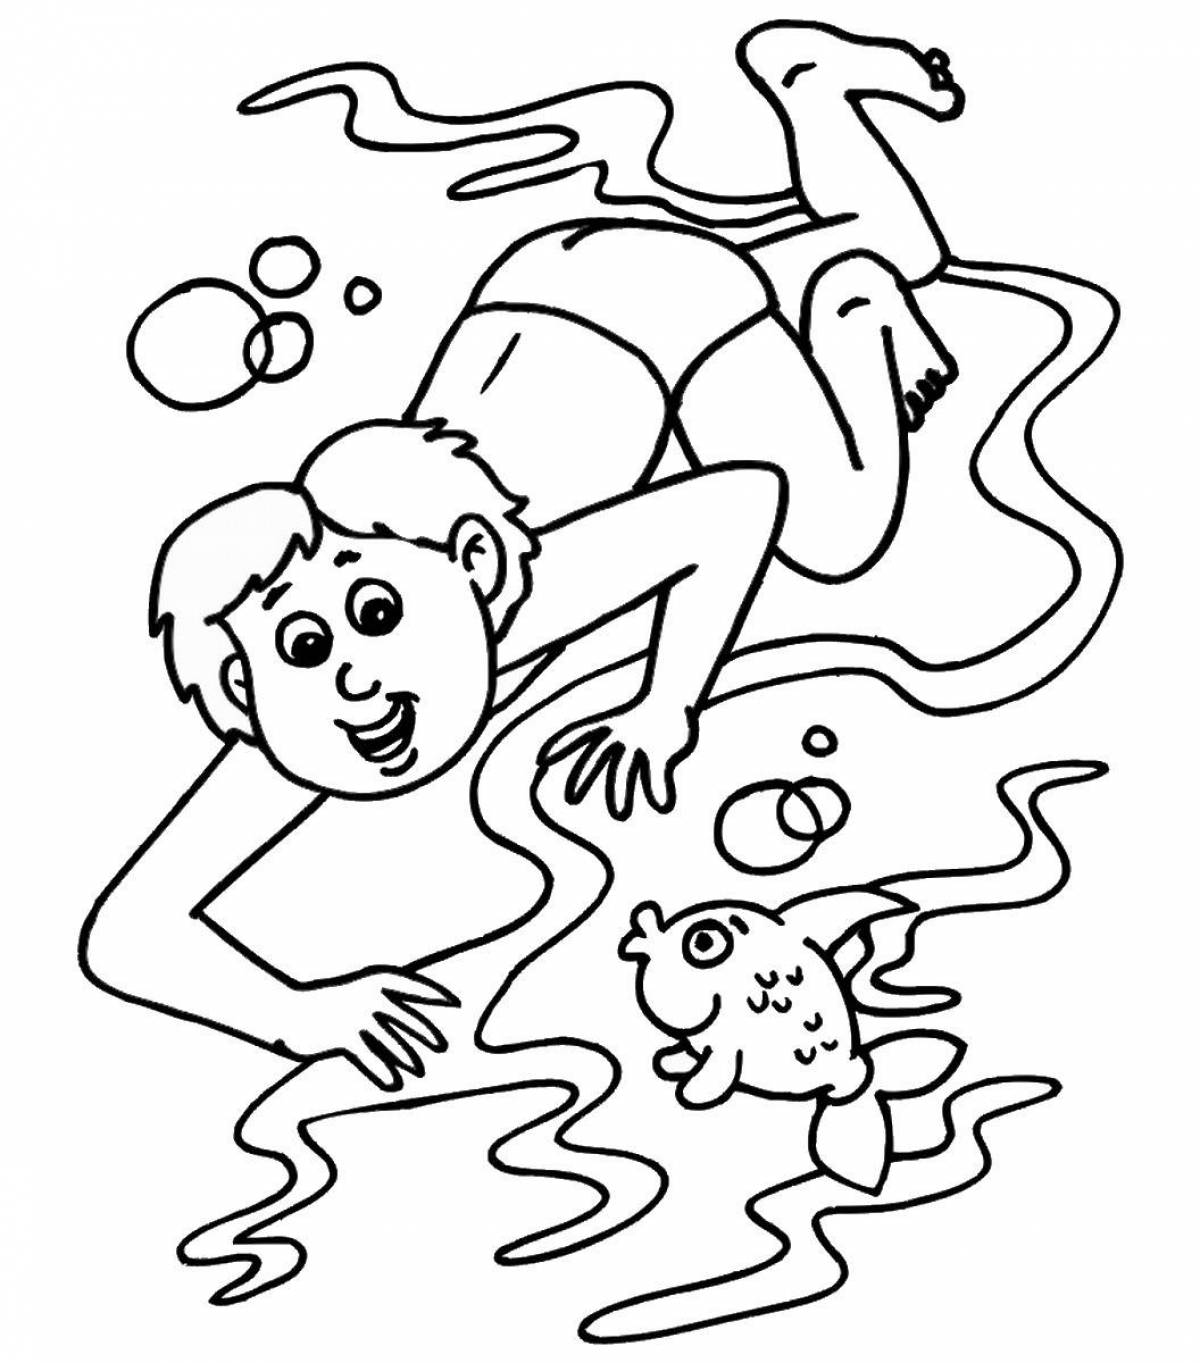 Awesome jewish case coloring page